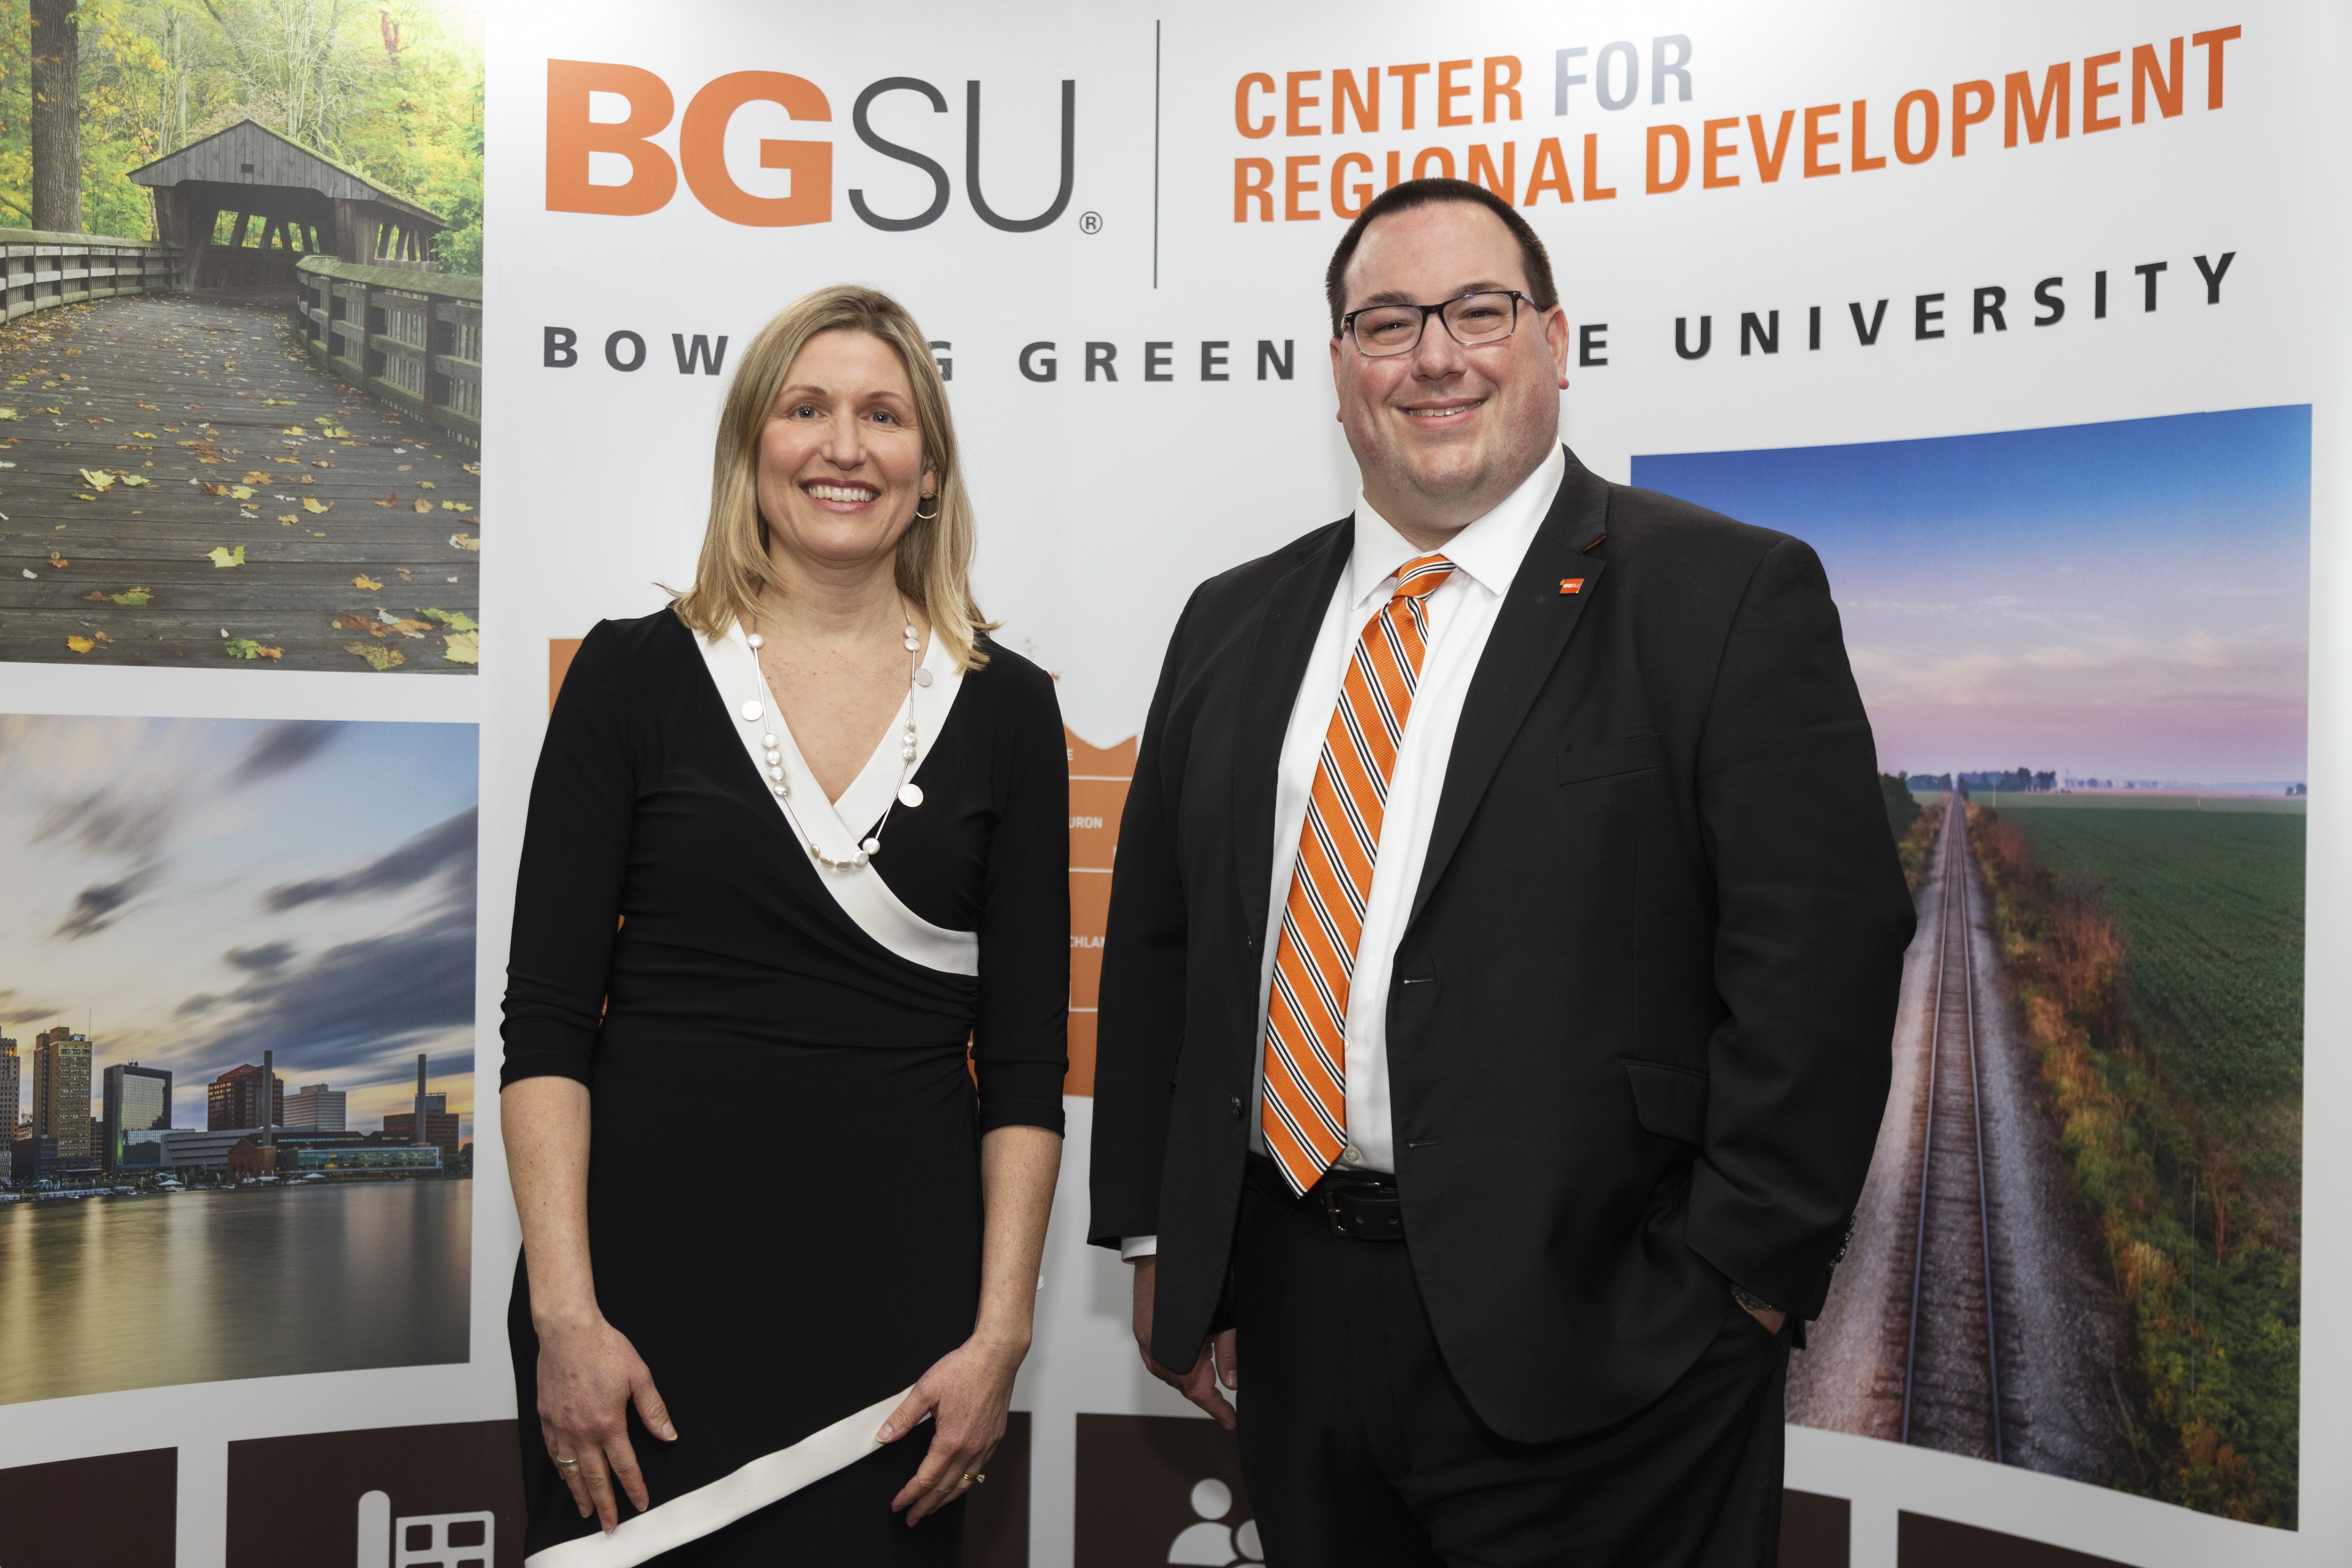 Jennifer Vey and Dr. Russell Mills posed in front of BGSU Center of Regional Development backdrop at the 20th Annual State of Region Conference.